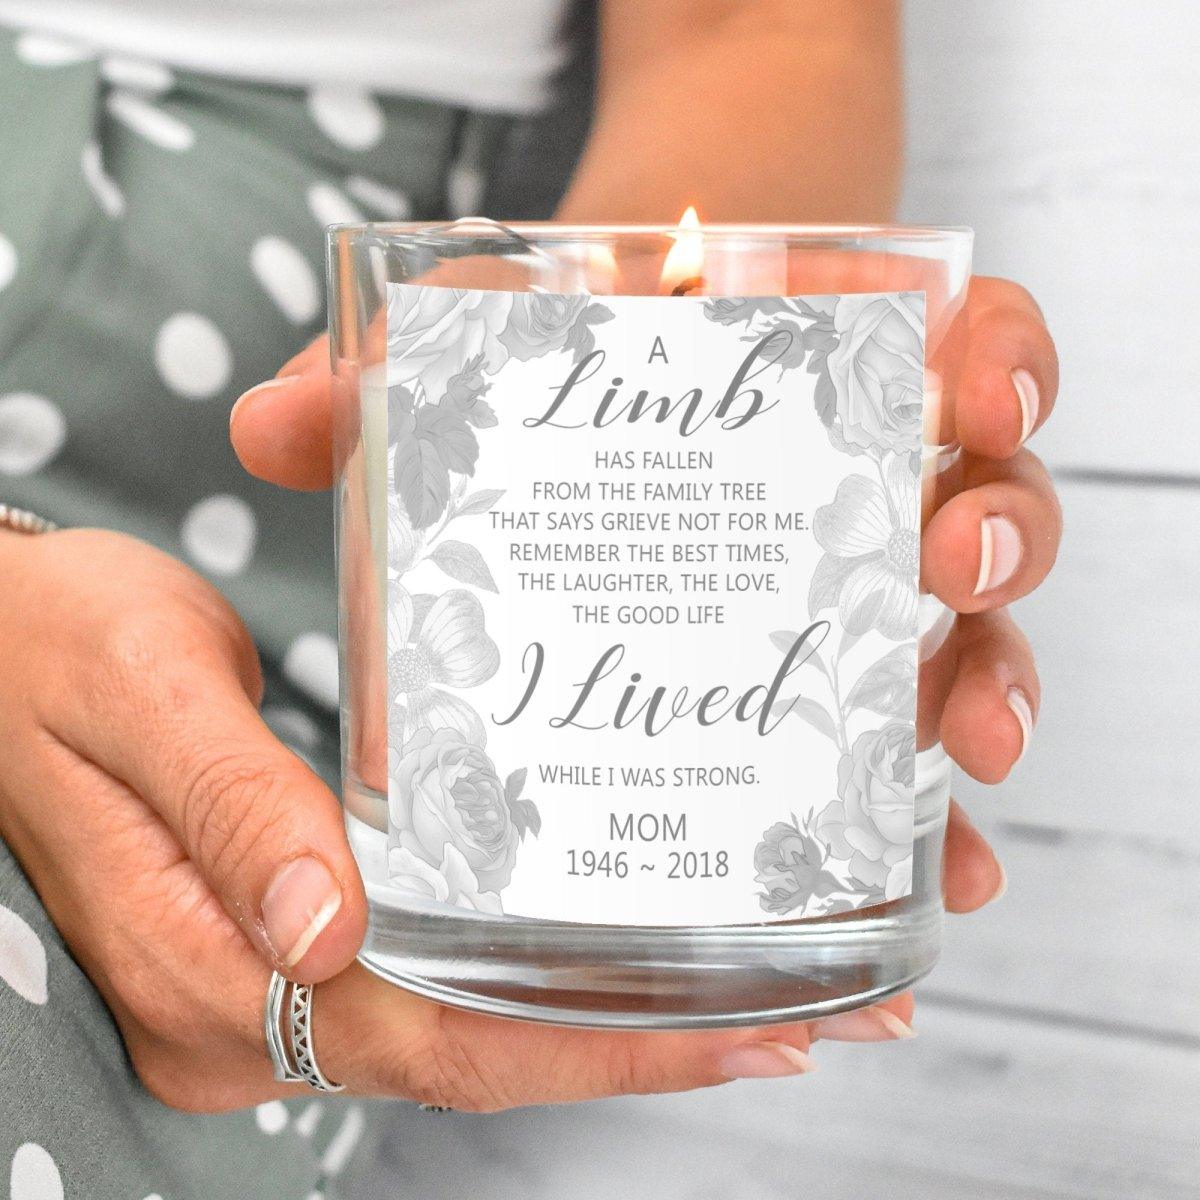 Personalised Memorial Lost Love One Candle, Memorial Candle, Remembrance Gift, Remember Loved One Loved One Candle Loving Memory, Scented, - Amy Lucy